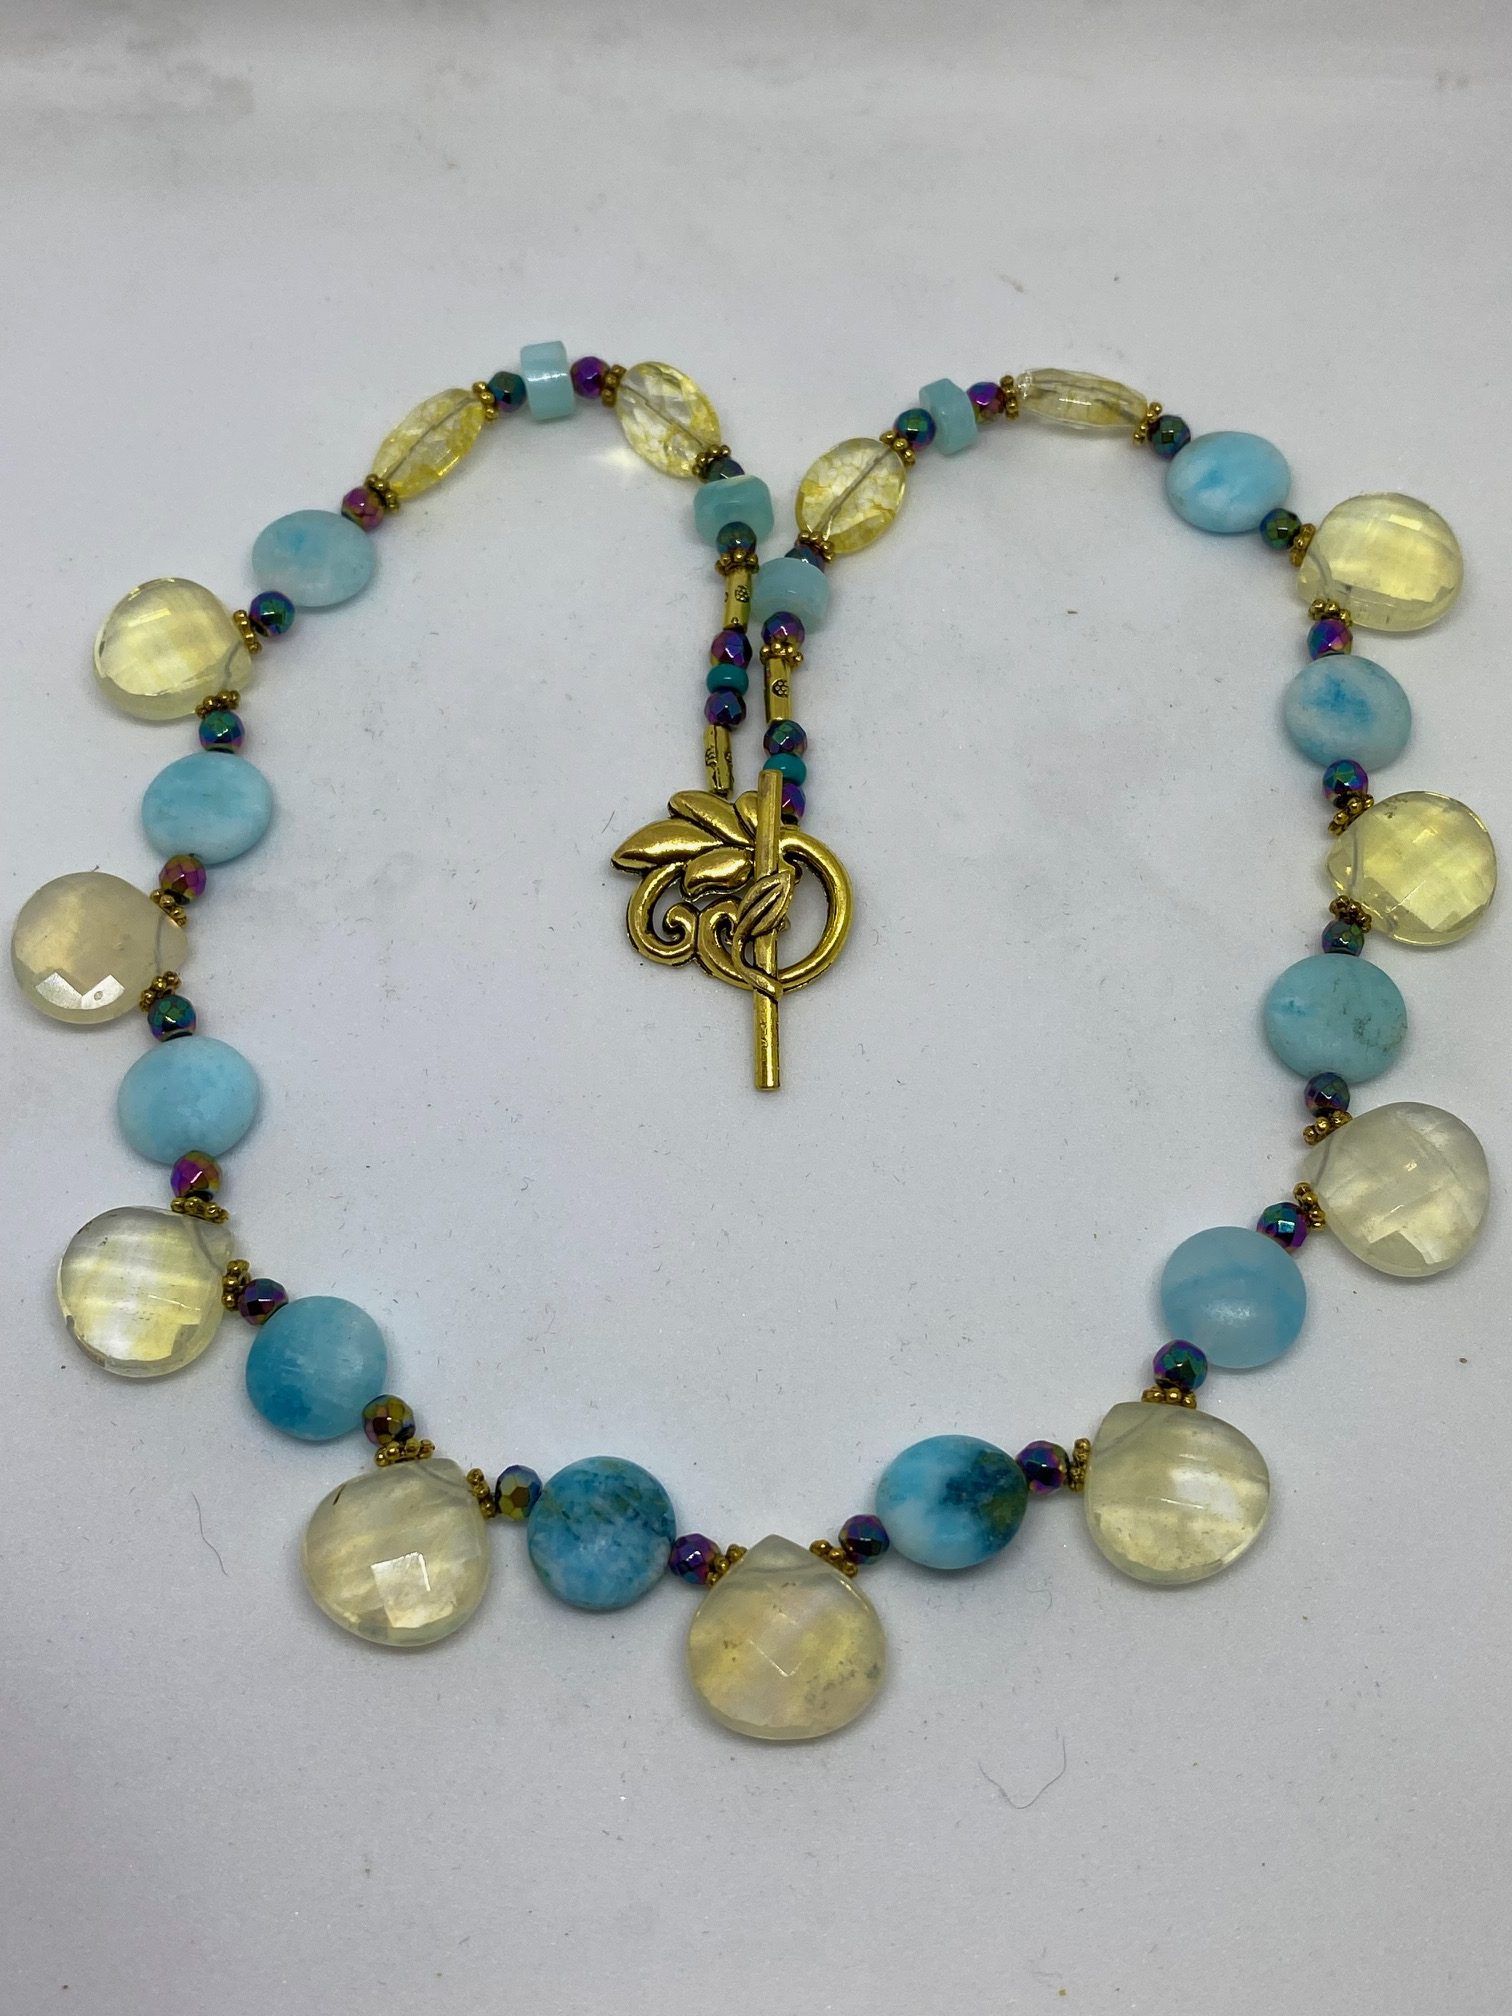 Lemon Quartz and Amazonite Necklace This necklace promotes tranquility, healing, and wholeness. 